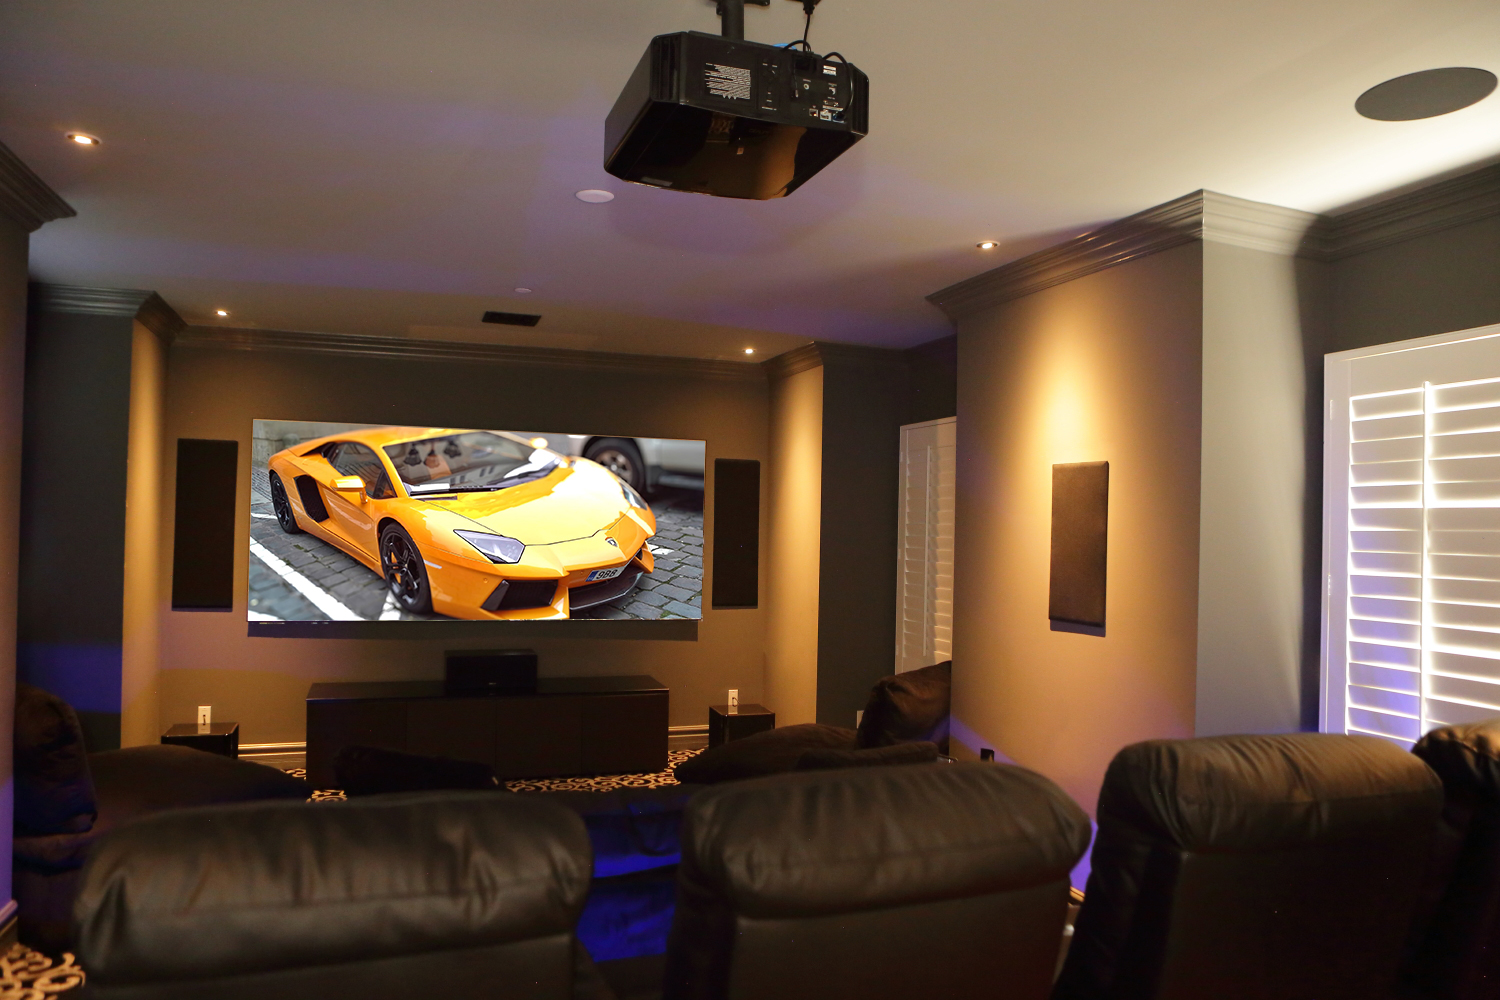 home theater automation